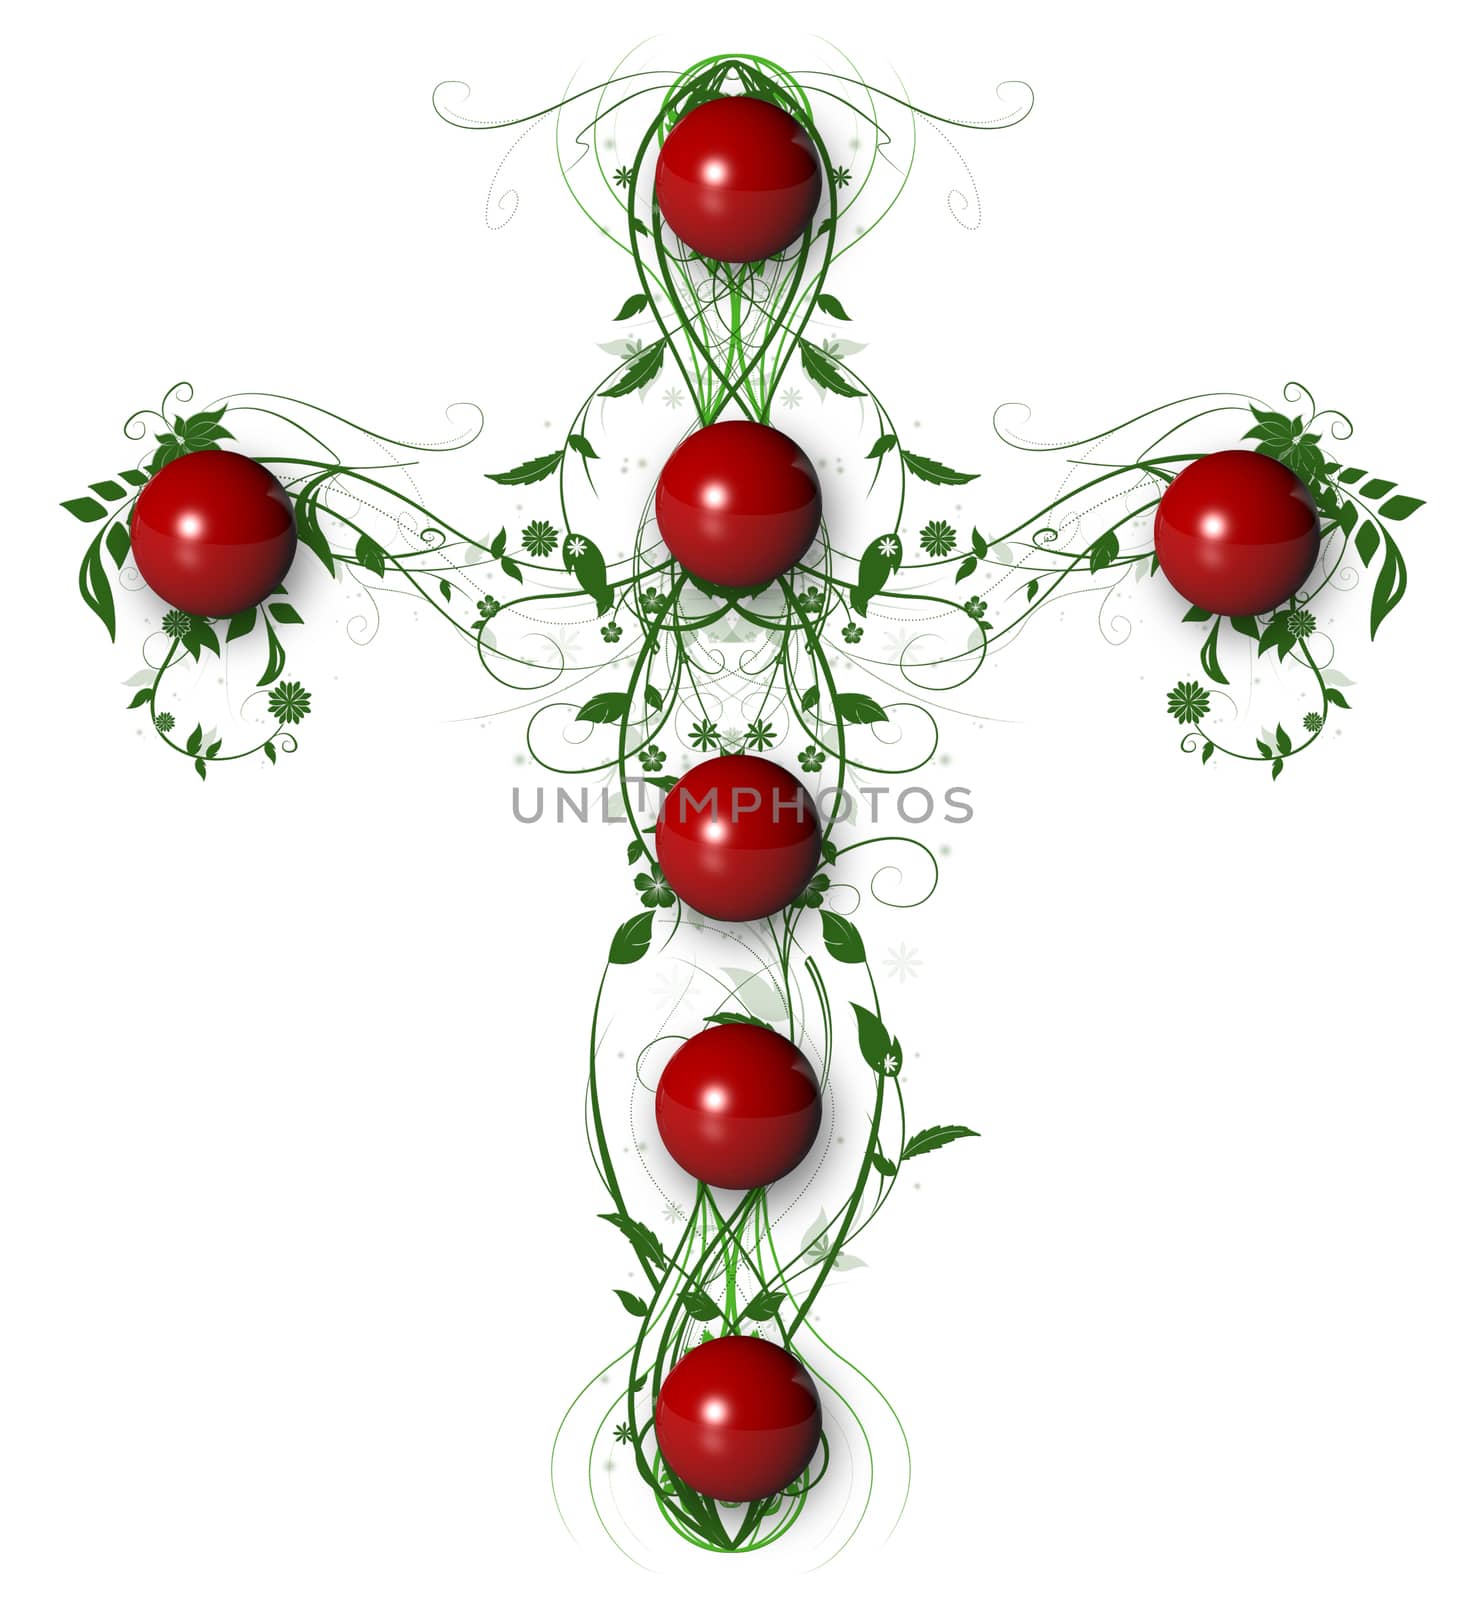 Green Floral Cross with red ball on white by vitanovski